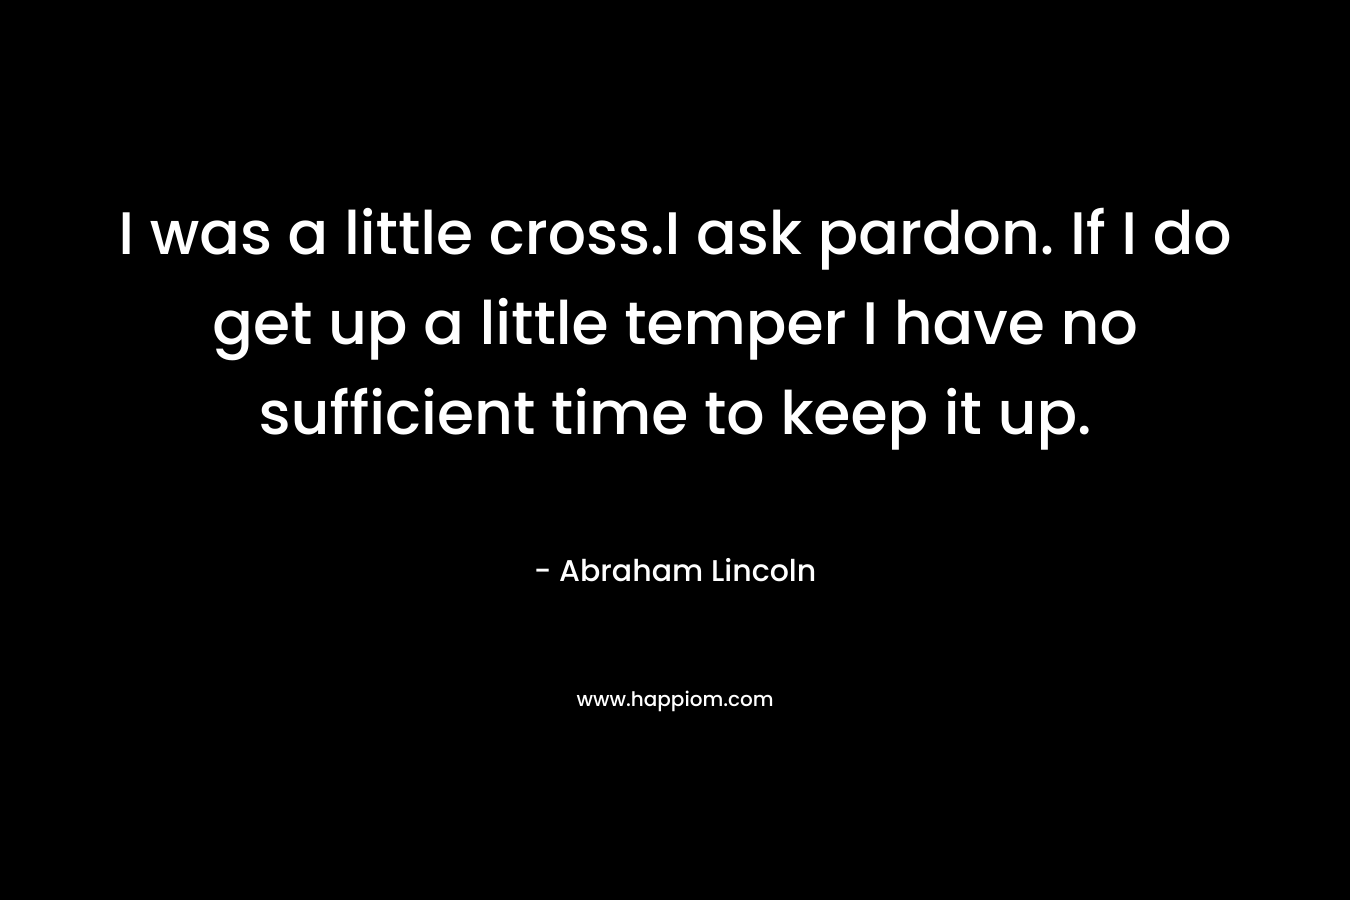 I was a little cross.I ask pardon. If I do get up a little temper I have no sufficient time to keep it up. – Abraham Lincoln